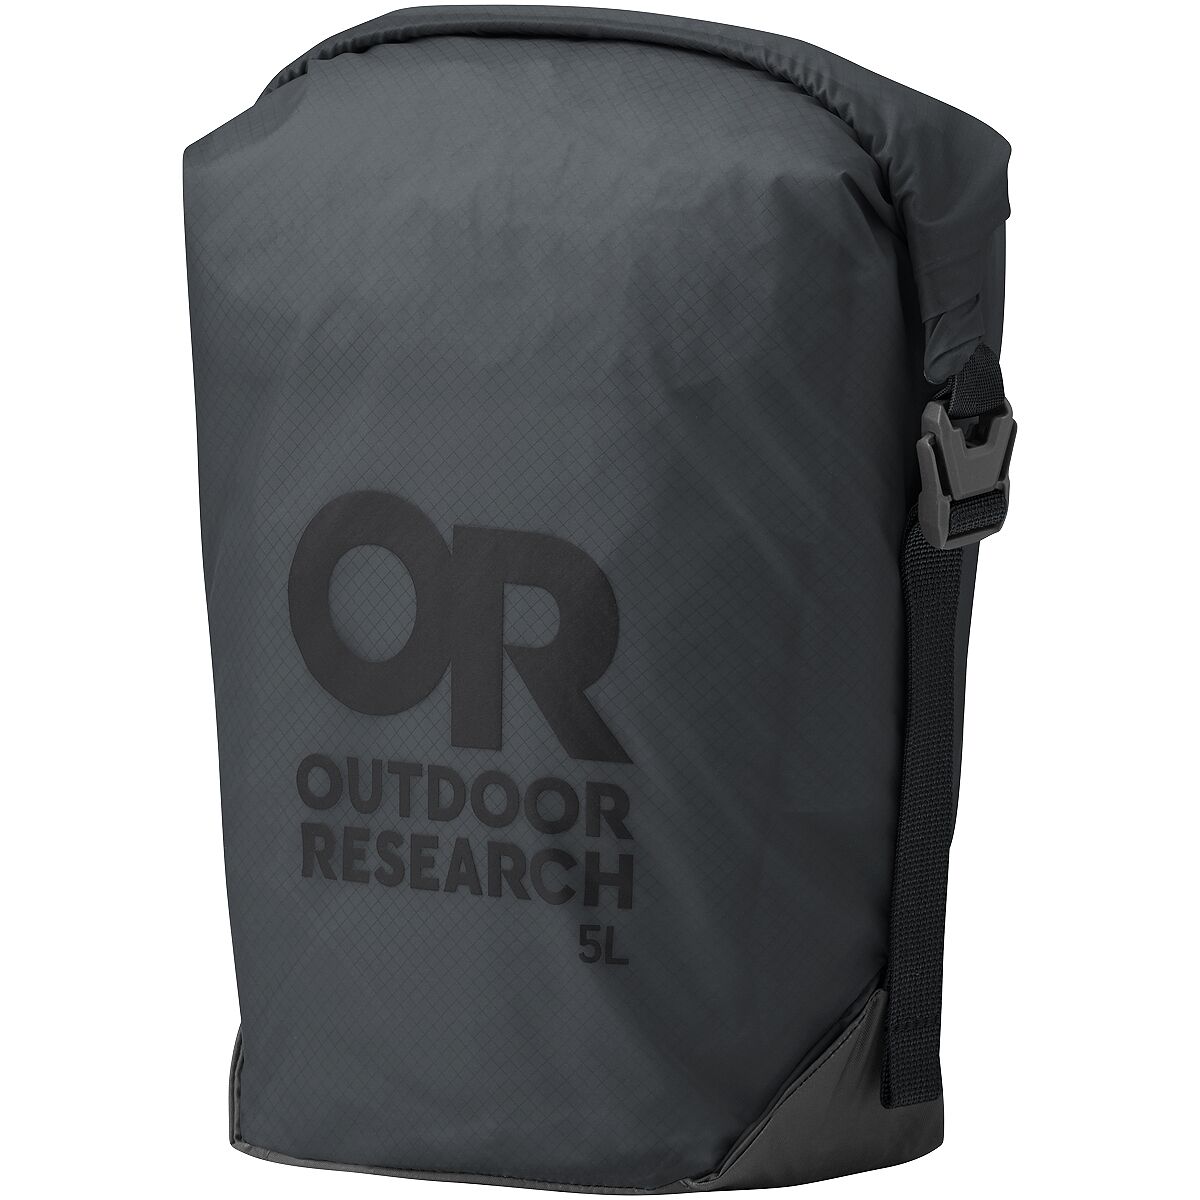 Outdoor Research PackOut Compression 5L Stuff Sack